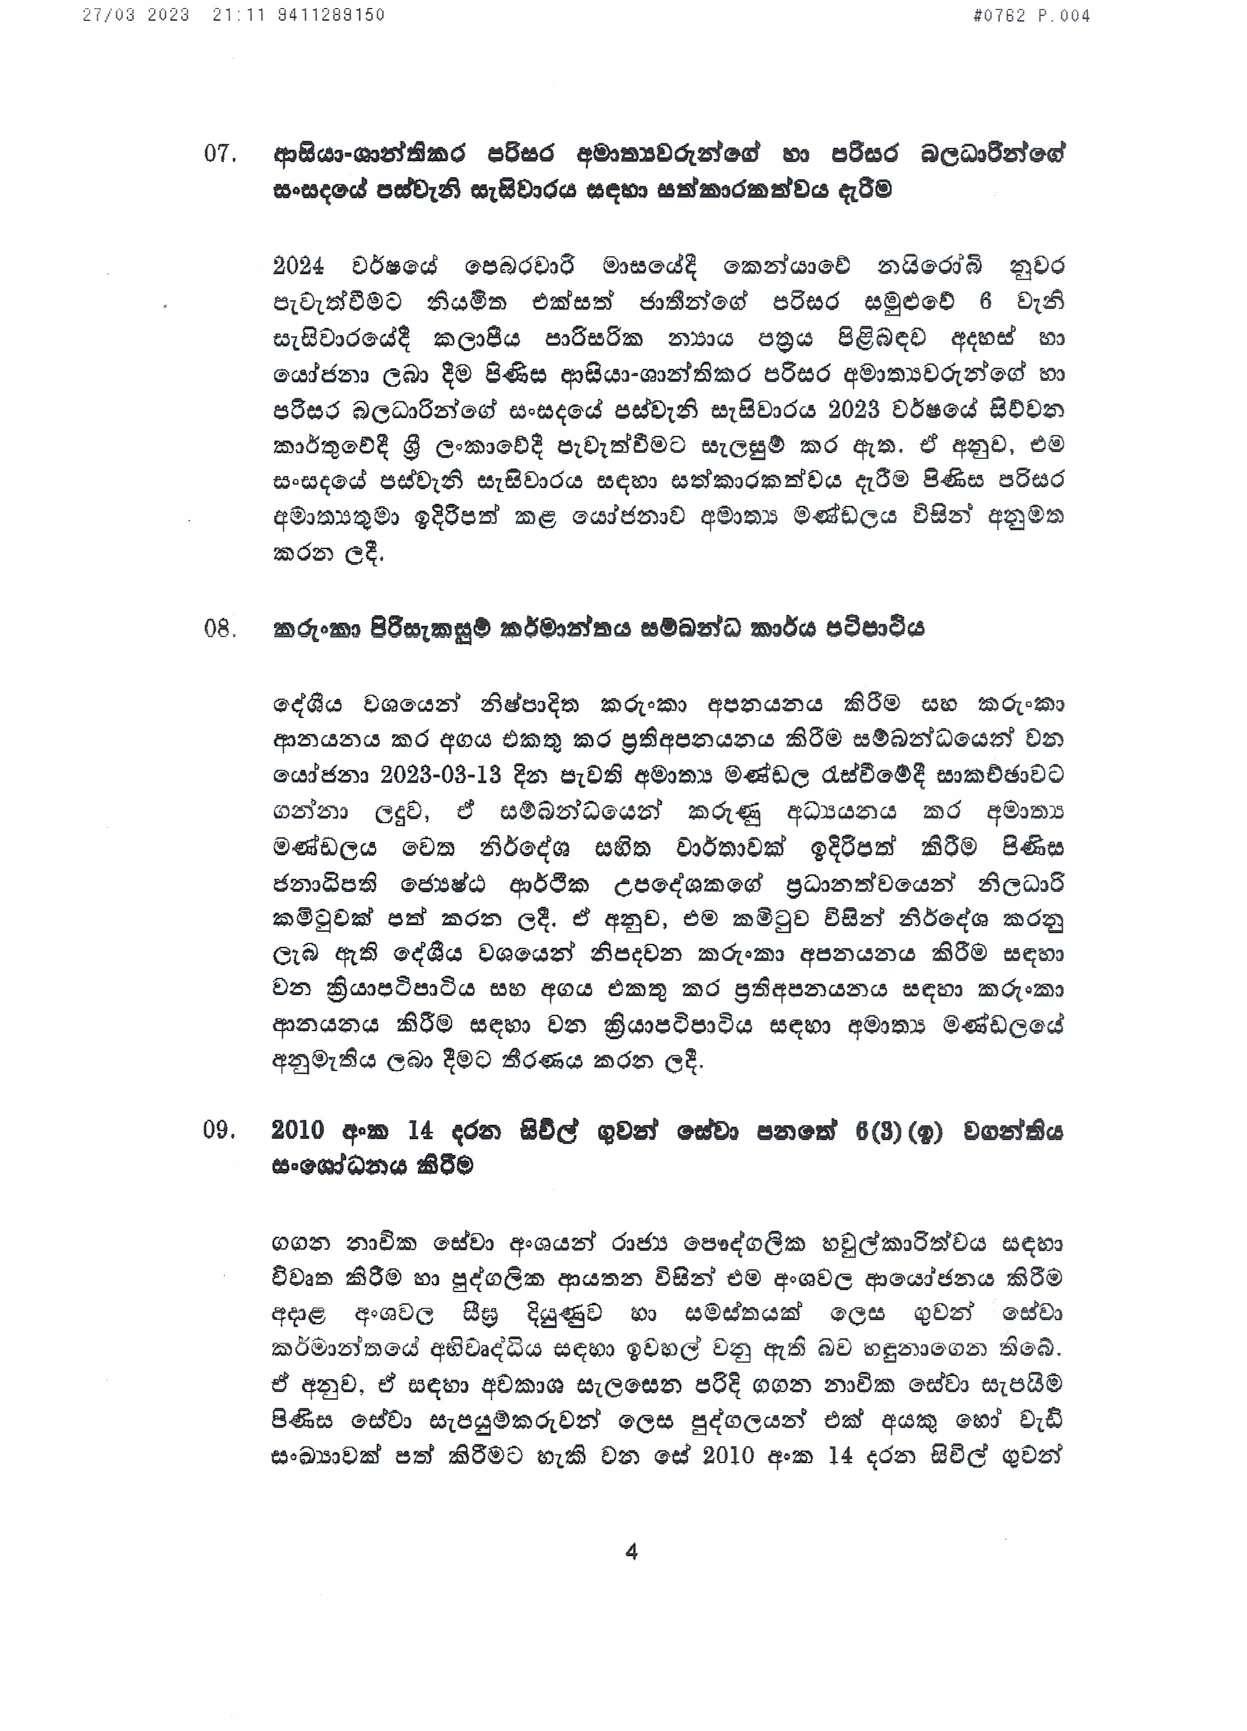 Cabinet Decision on 27.03.2023 page 004